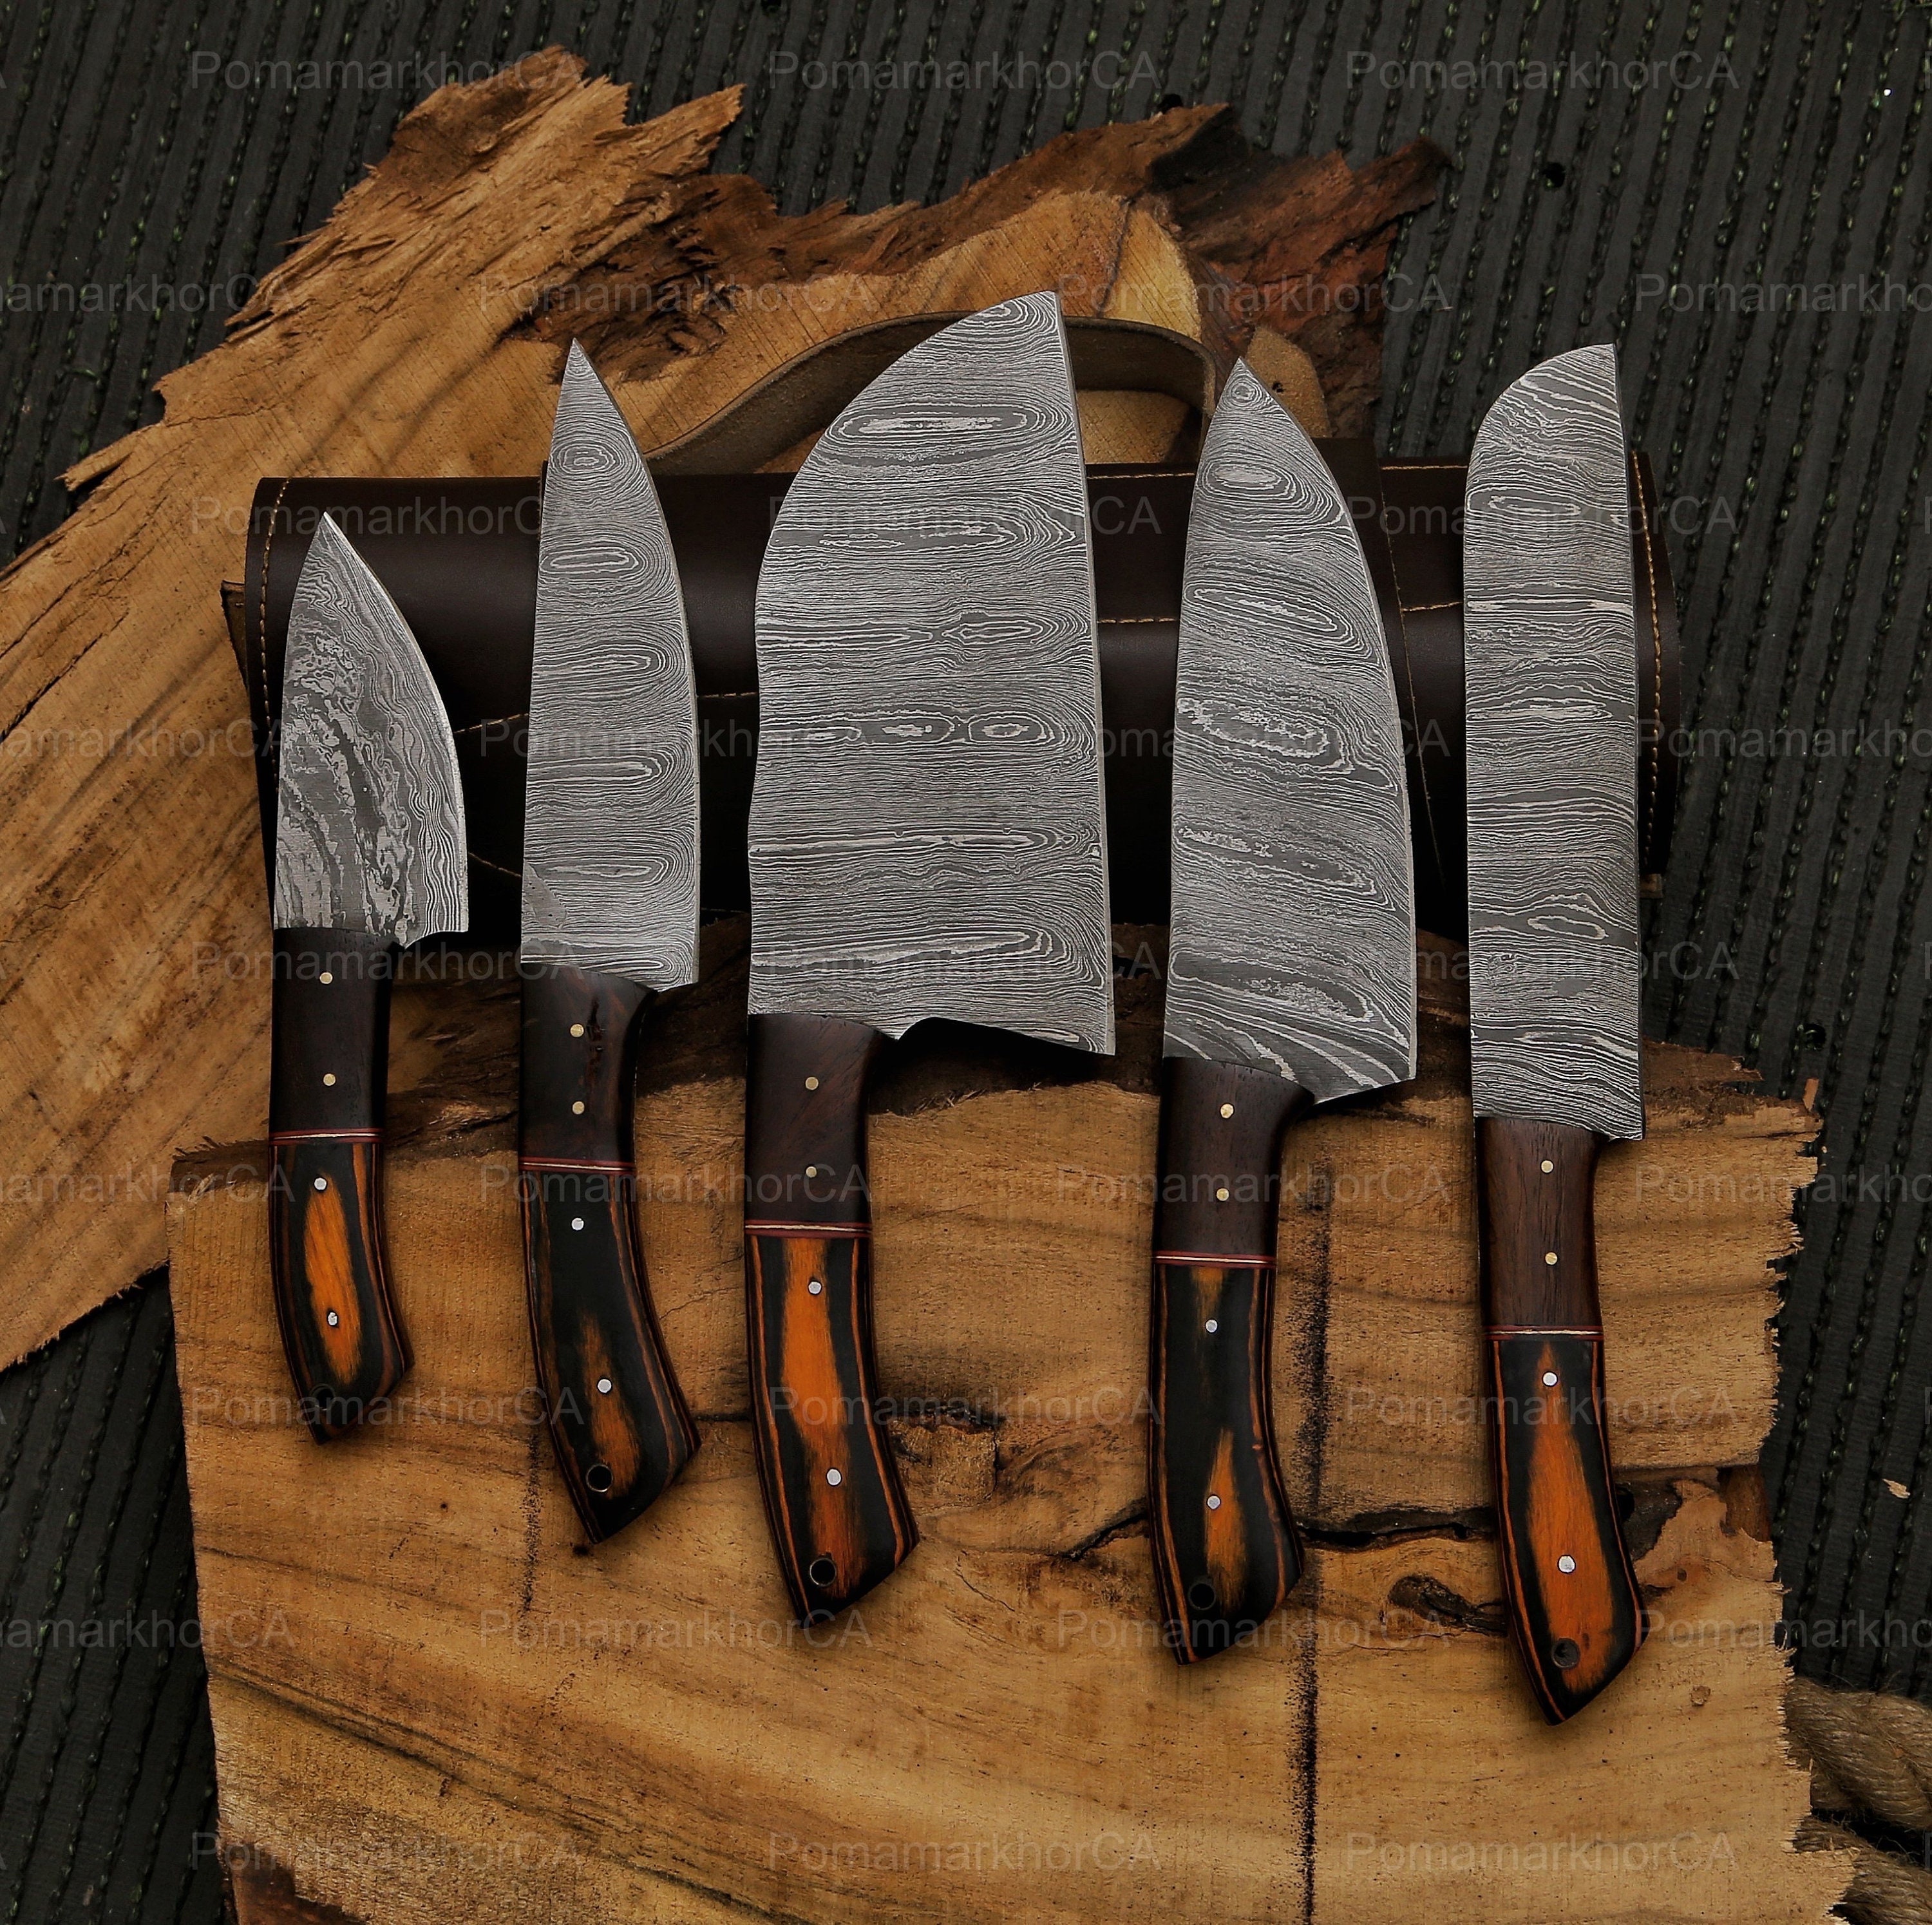 5 BBQ Knife Kitchen Knives Hand Forged Carbon Steel Black Chef's